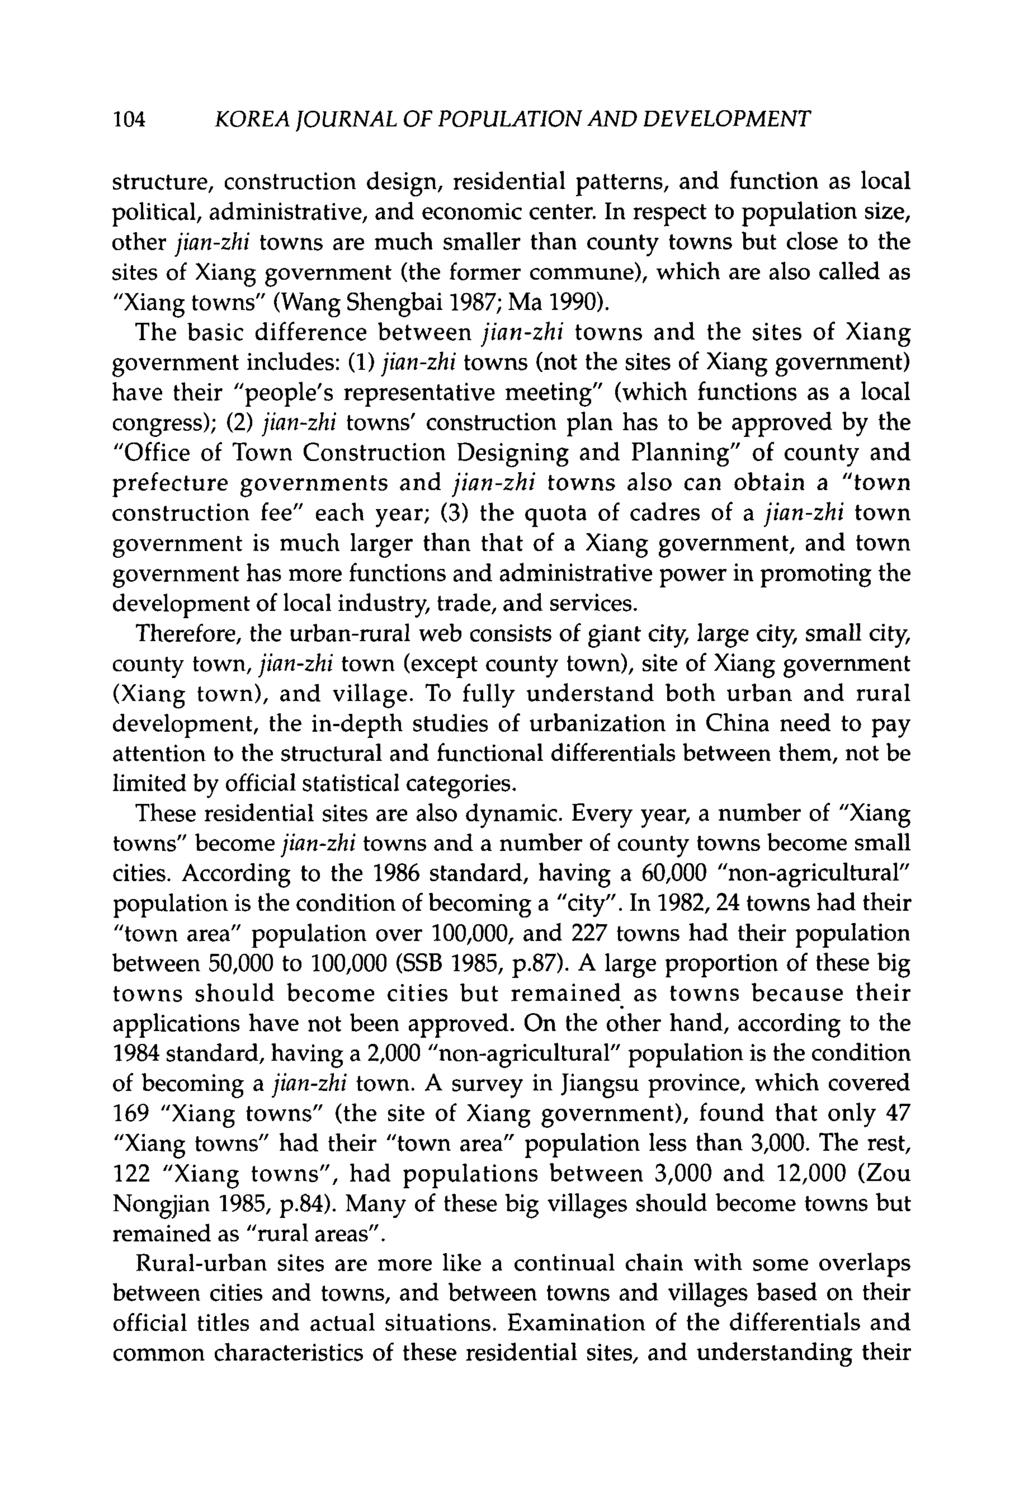 104 KOREA JOURNAL OF POPULATION AND DEVELOPMENT structure, construction design, residential patterns, and function as local political, administrative, and economic center.